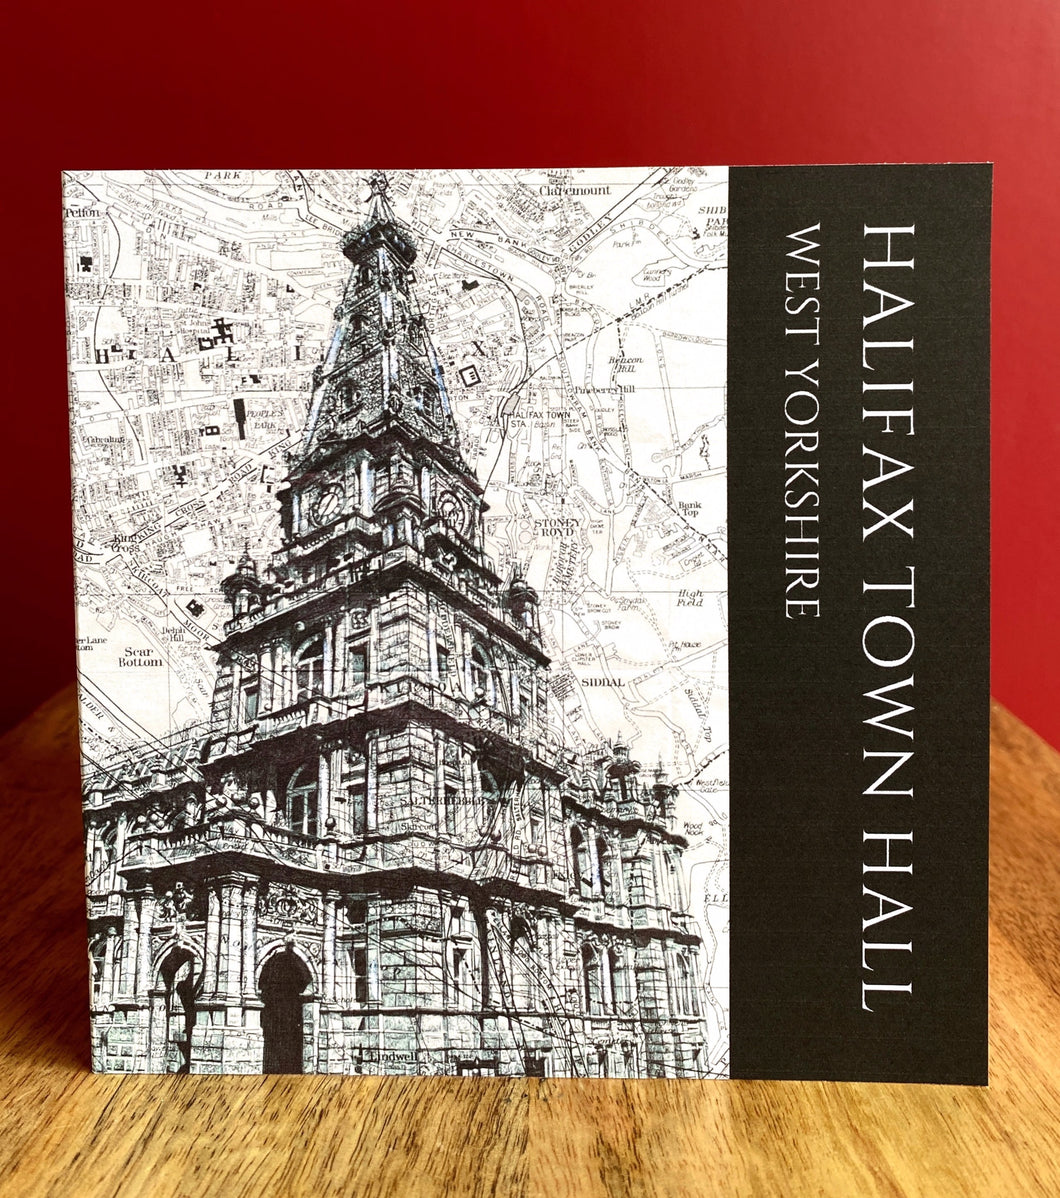 Halifax Town Hall Greeting Card. Printed drawing over map. Blank inside